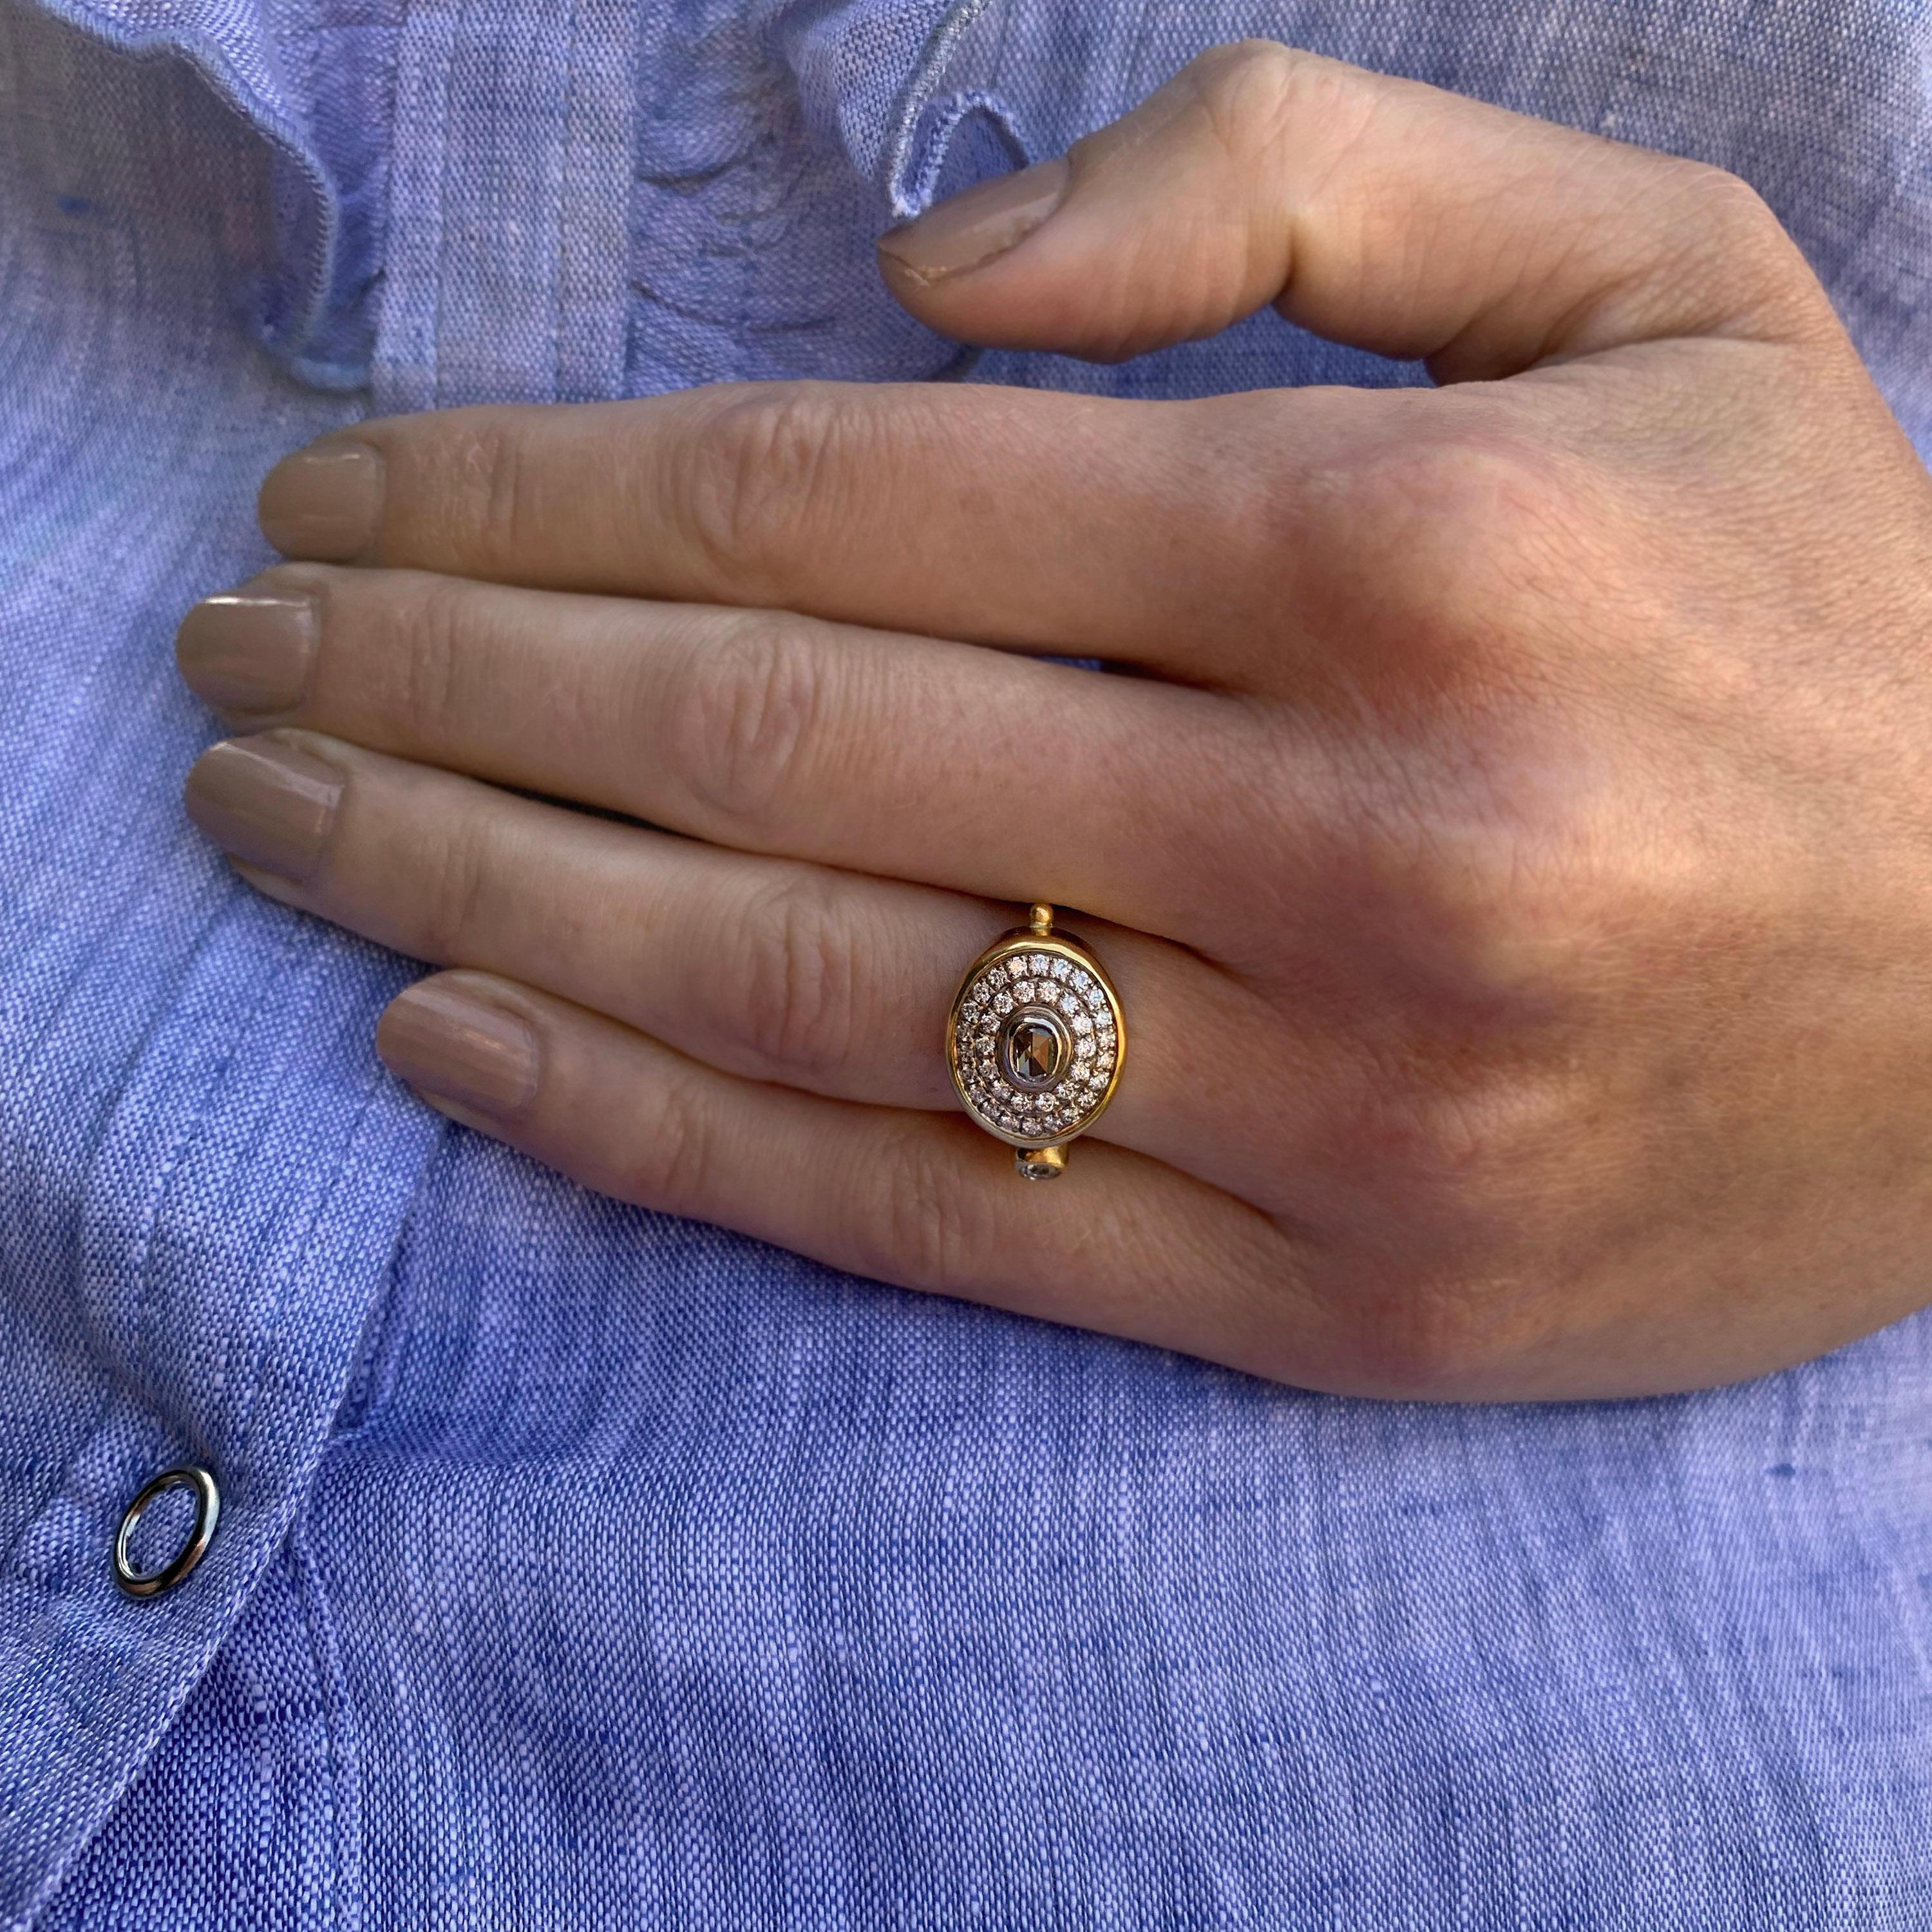 Simply stunning double halo ring pave set with rose-cut diamonds in 18k yellow gold presented on a fine gold ring: quirky, organic, elegant.
This stunning organic double-halo ring centres around an unusual oval rose-cut champagne diamond. The